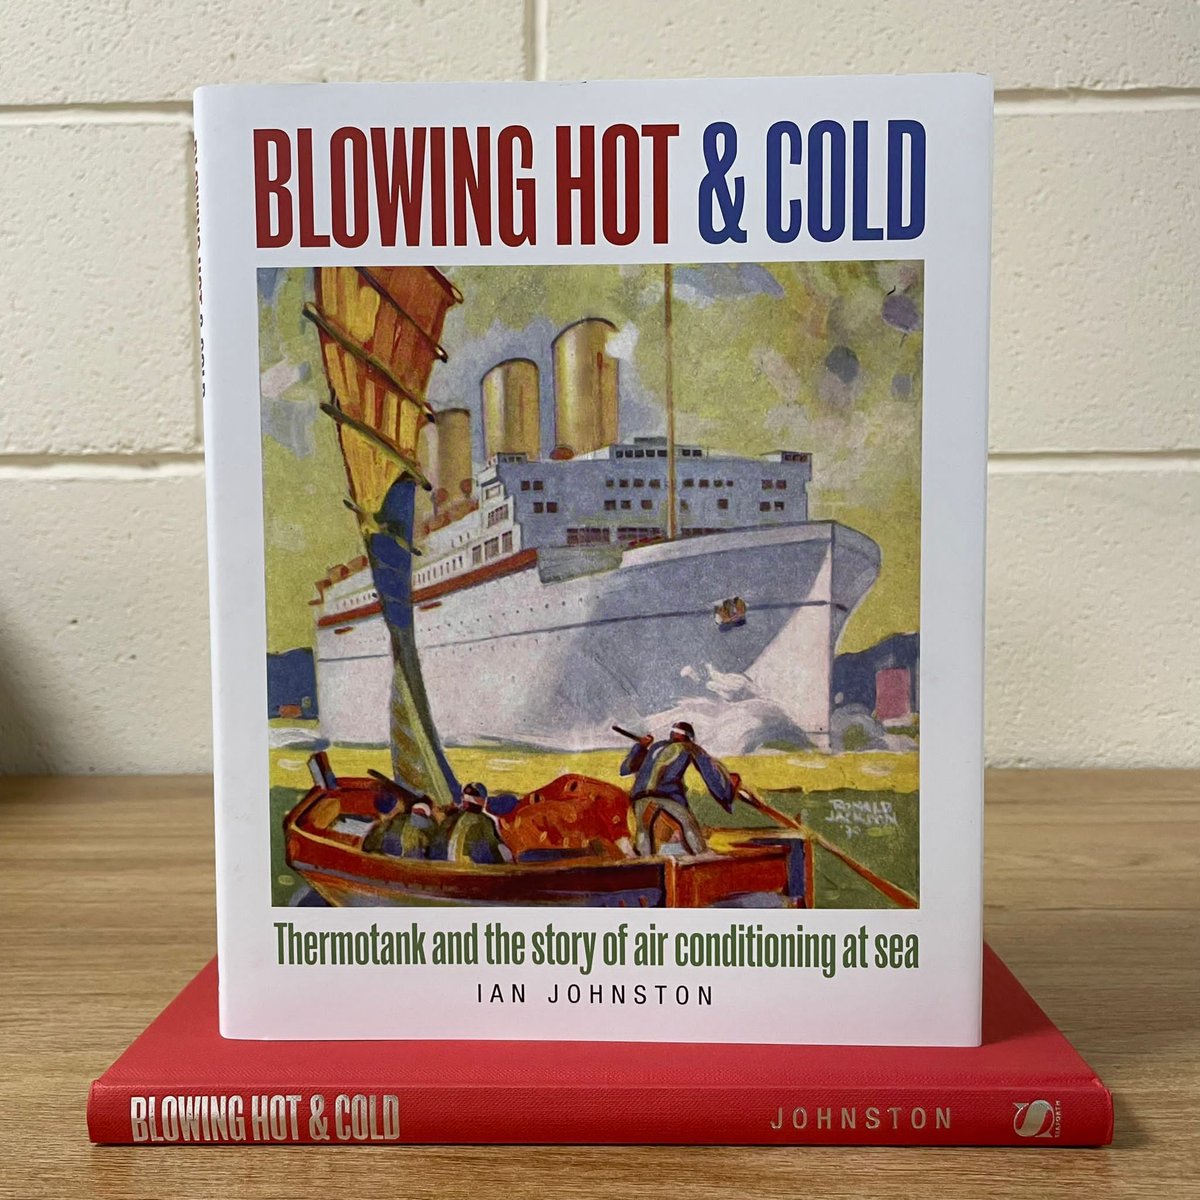 📚 Blowing Hot and Cold by Ian Johnston Discover the untold story of Thermotank, a pioneering British engineering firm founded by Alexander Stewart. From revolutionizing ship comfort to inventing airliner ventilation. 🚢 #Thermotank 🛒 buff.ly/3TN7vv3